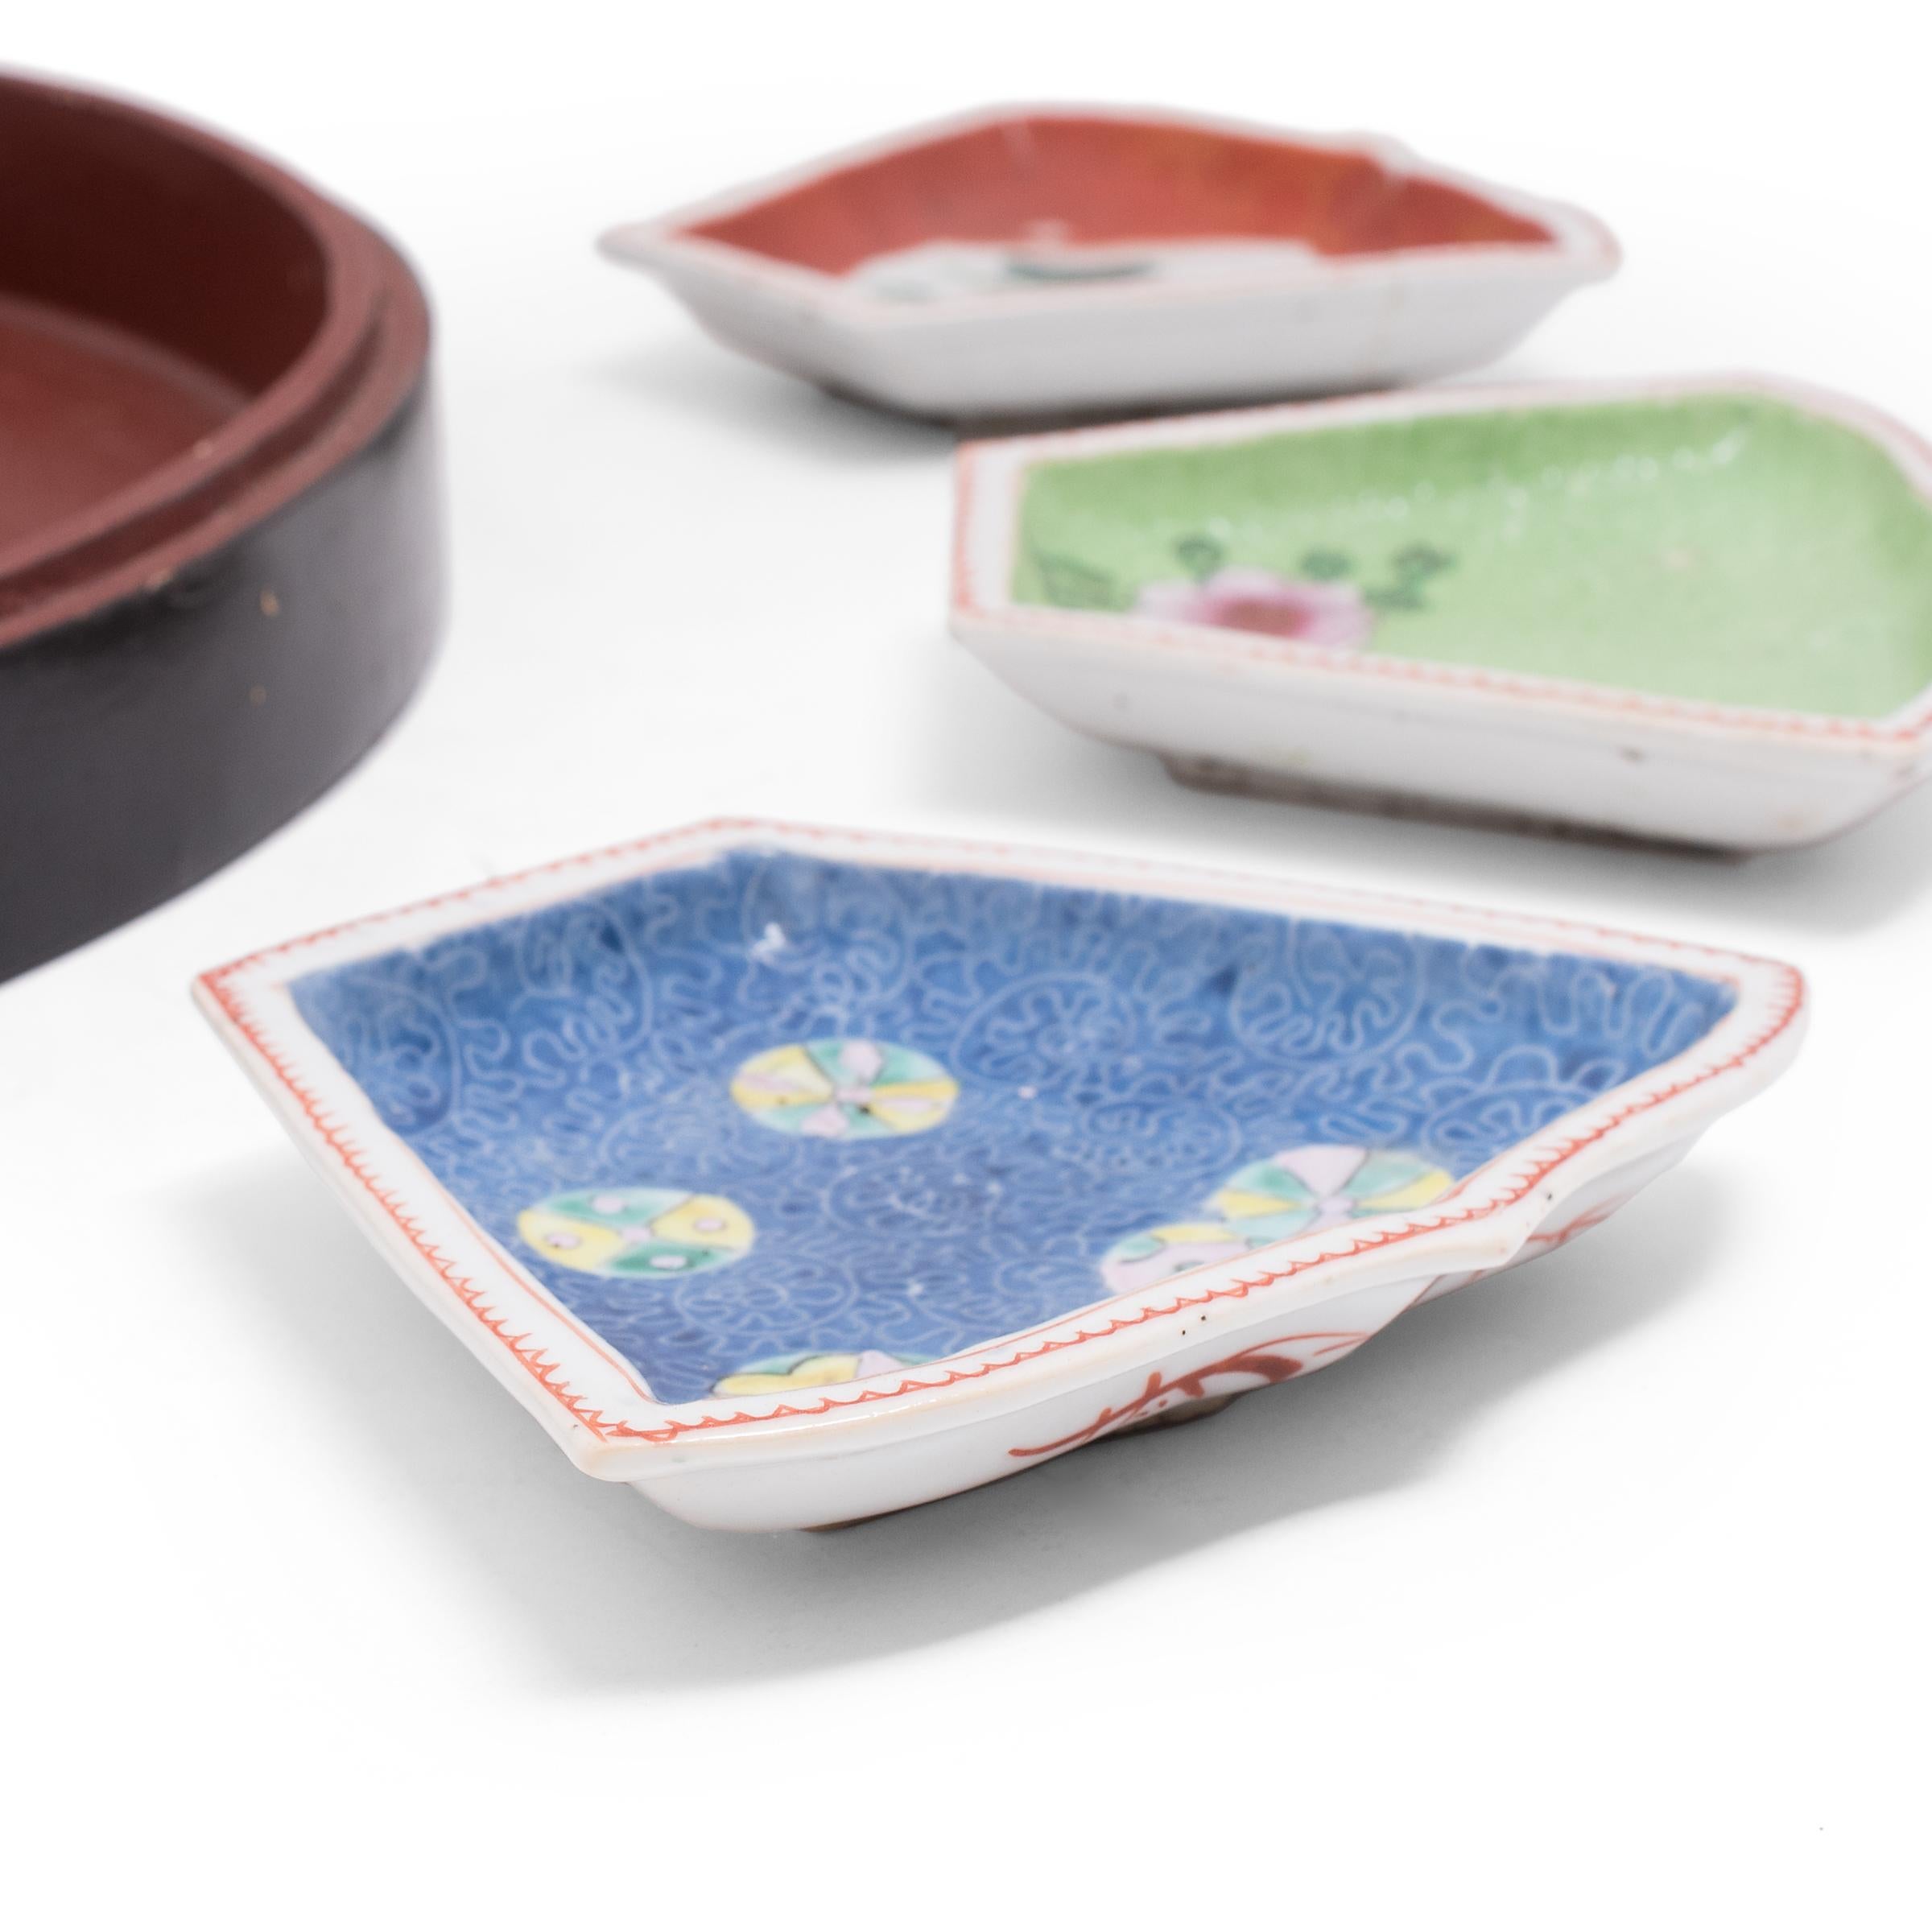 20th Century Chinese Presentation Box with Porcelain Trays, c. 1920